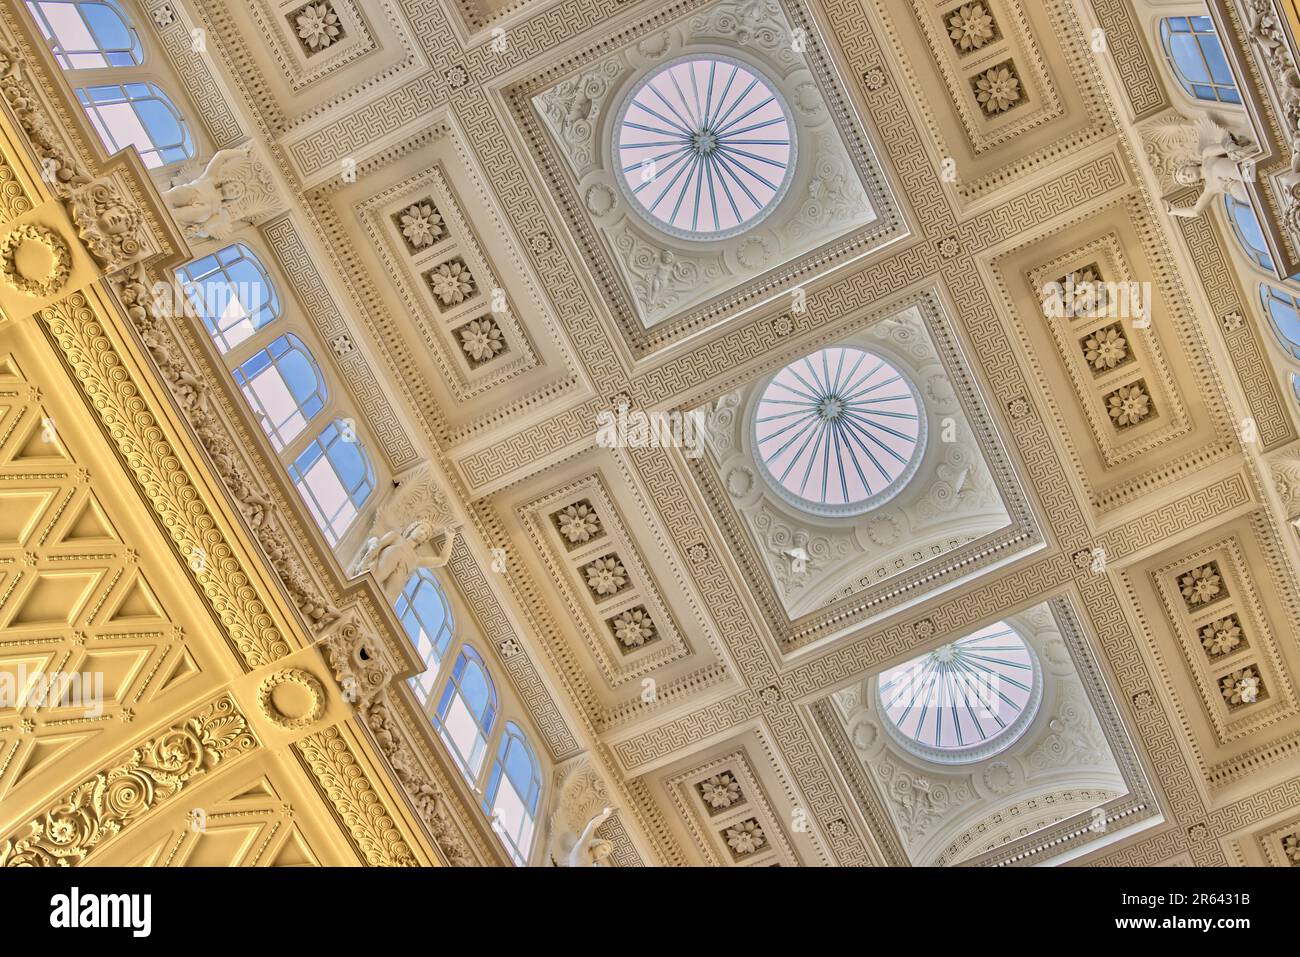 The ceiling and roof of the Fitzwilliam Museum in Cambridge. Stock Photo